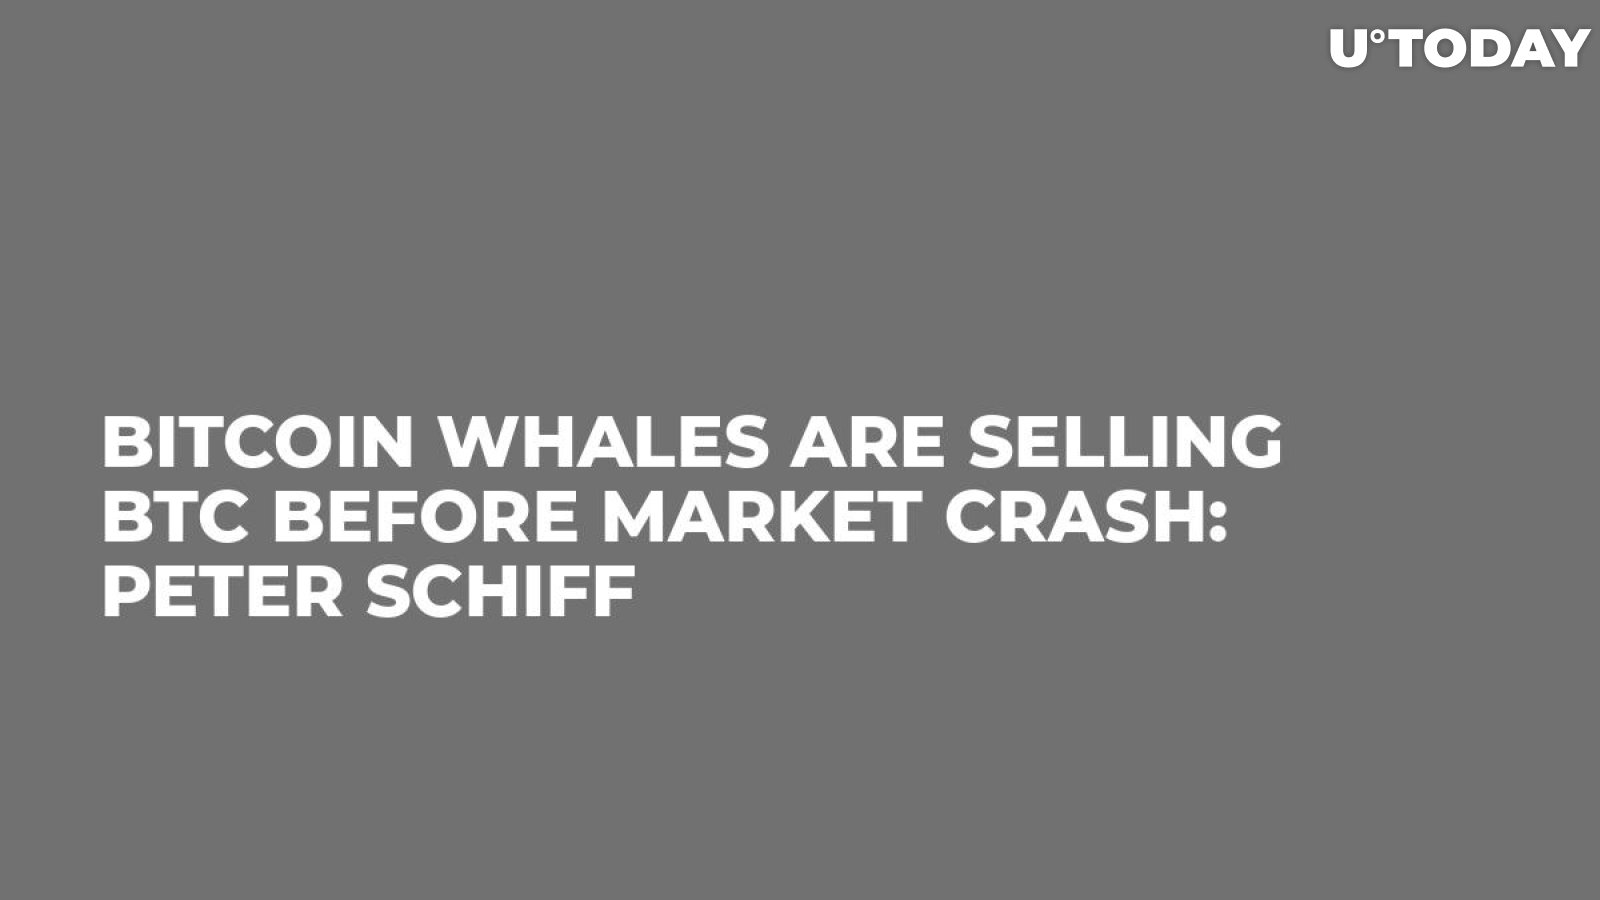 Bitcoin Whales Are Selling BTC Before Market Crash: Peter Schiff 